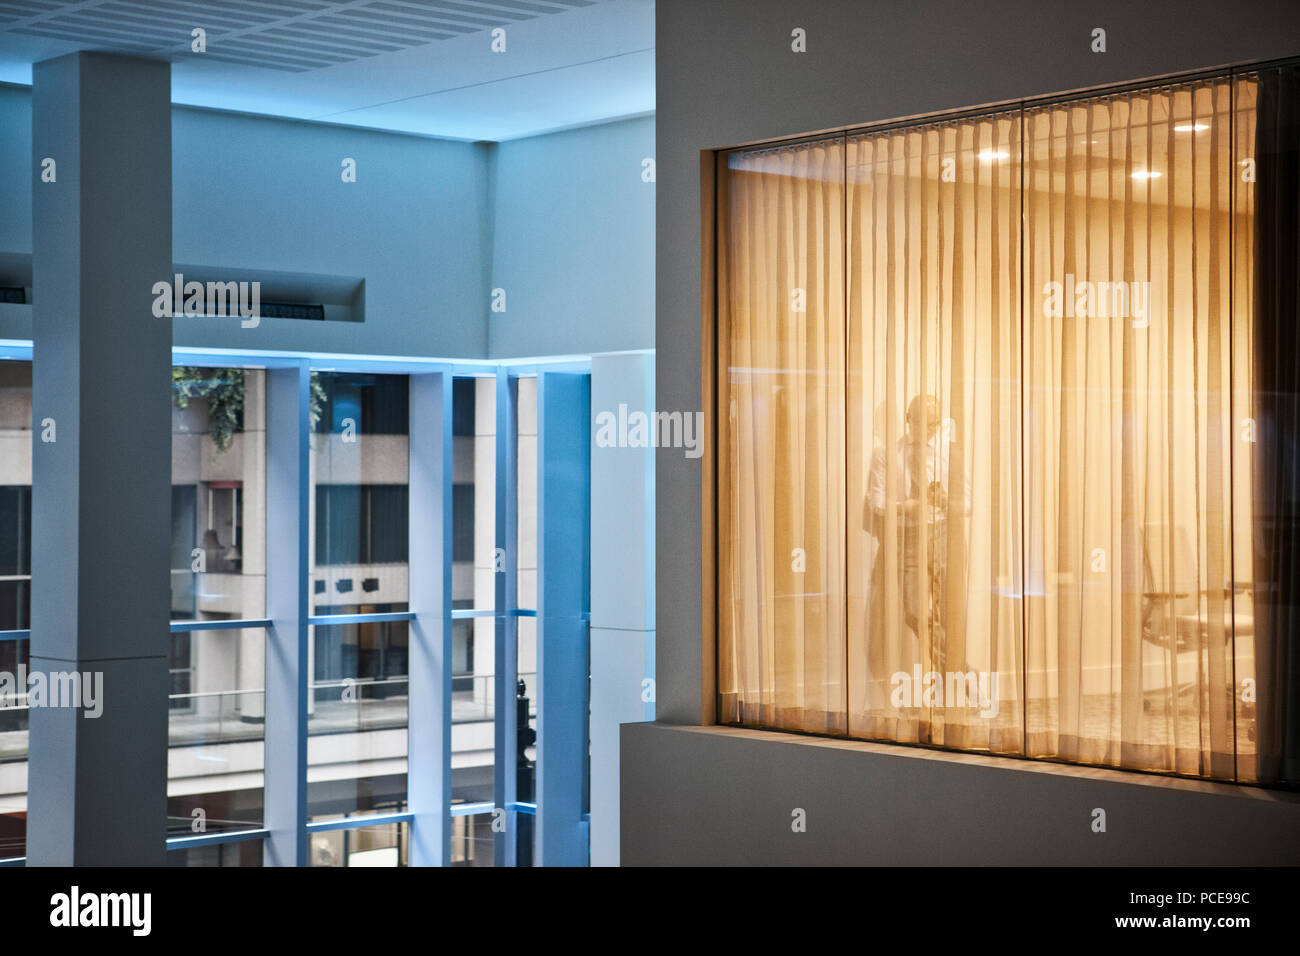 A man standing using h is phone in an office viewed from a building atrium. Stock Photo